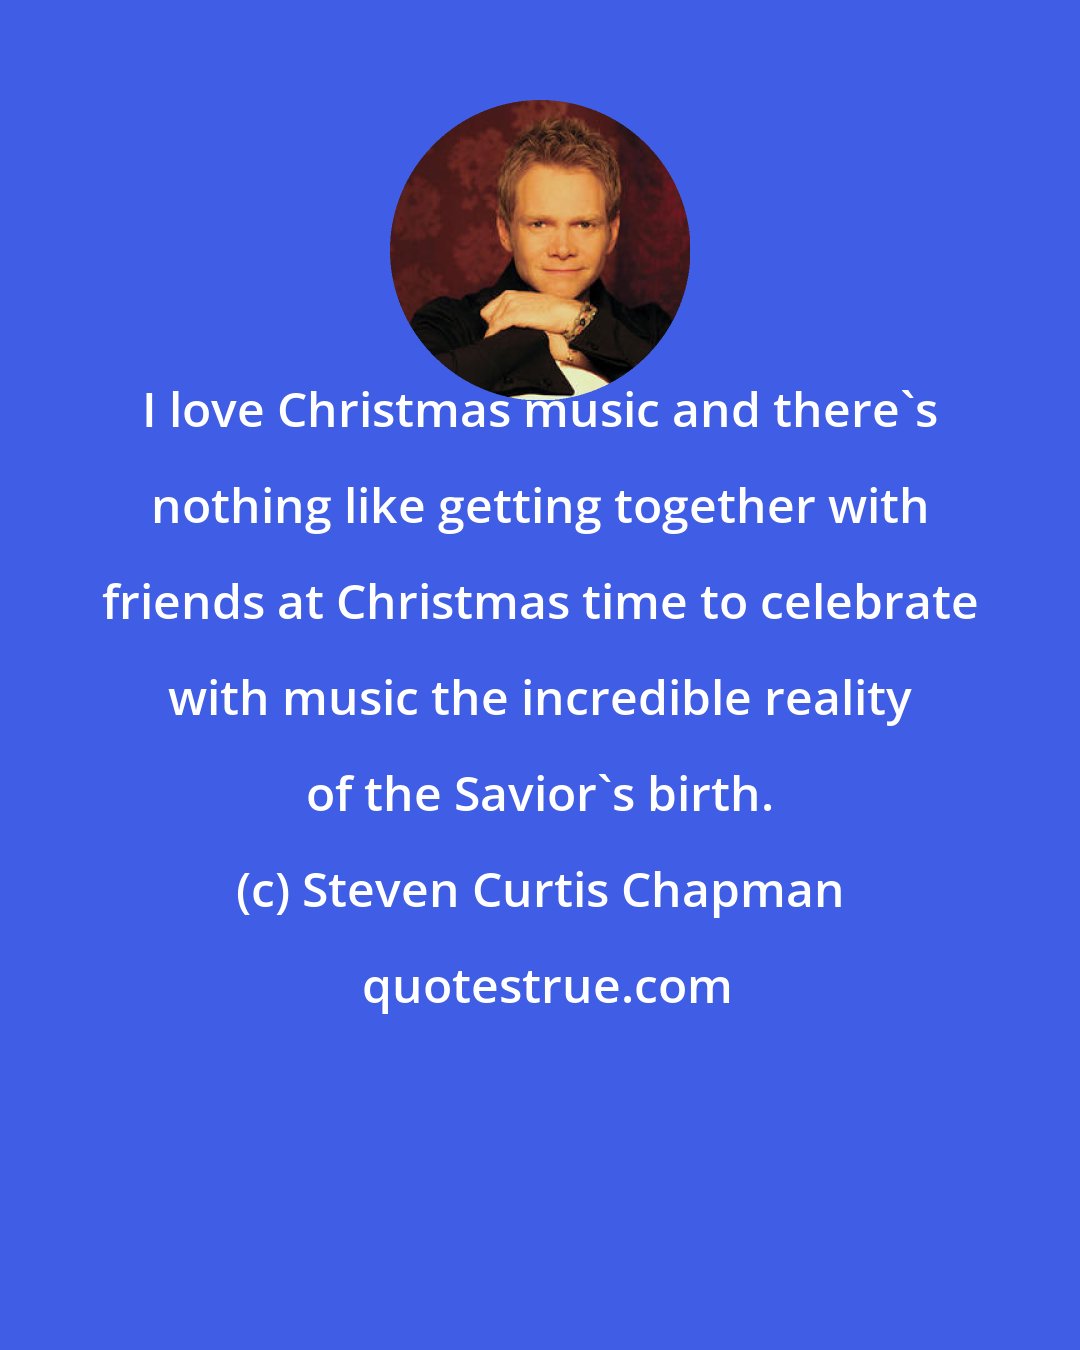 Steven Curtis Chapman: I love Christmas music and there's nothing like getting together with friends at Christmas time to celebrate with music the incredible reality of the Savior's birth.